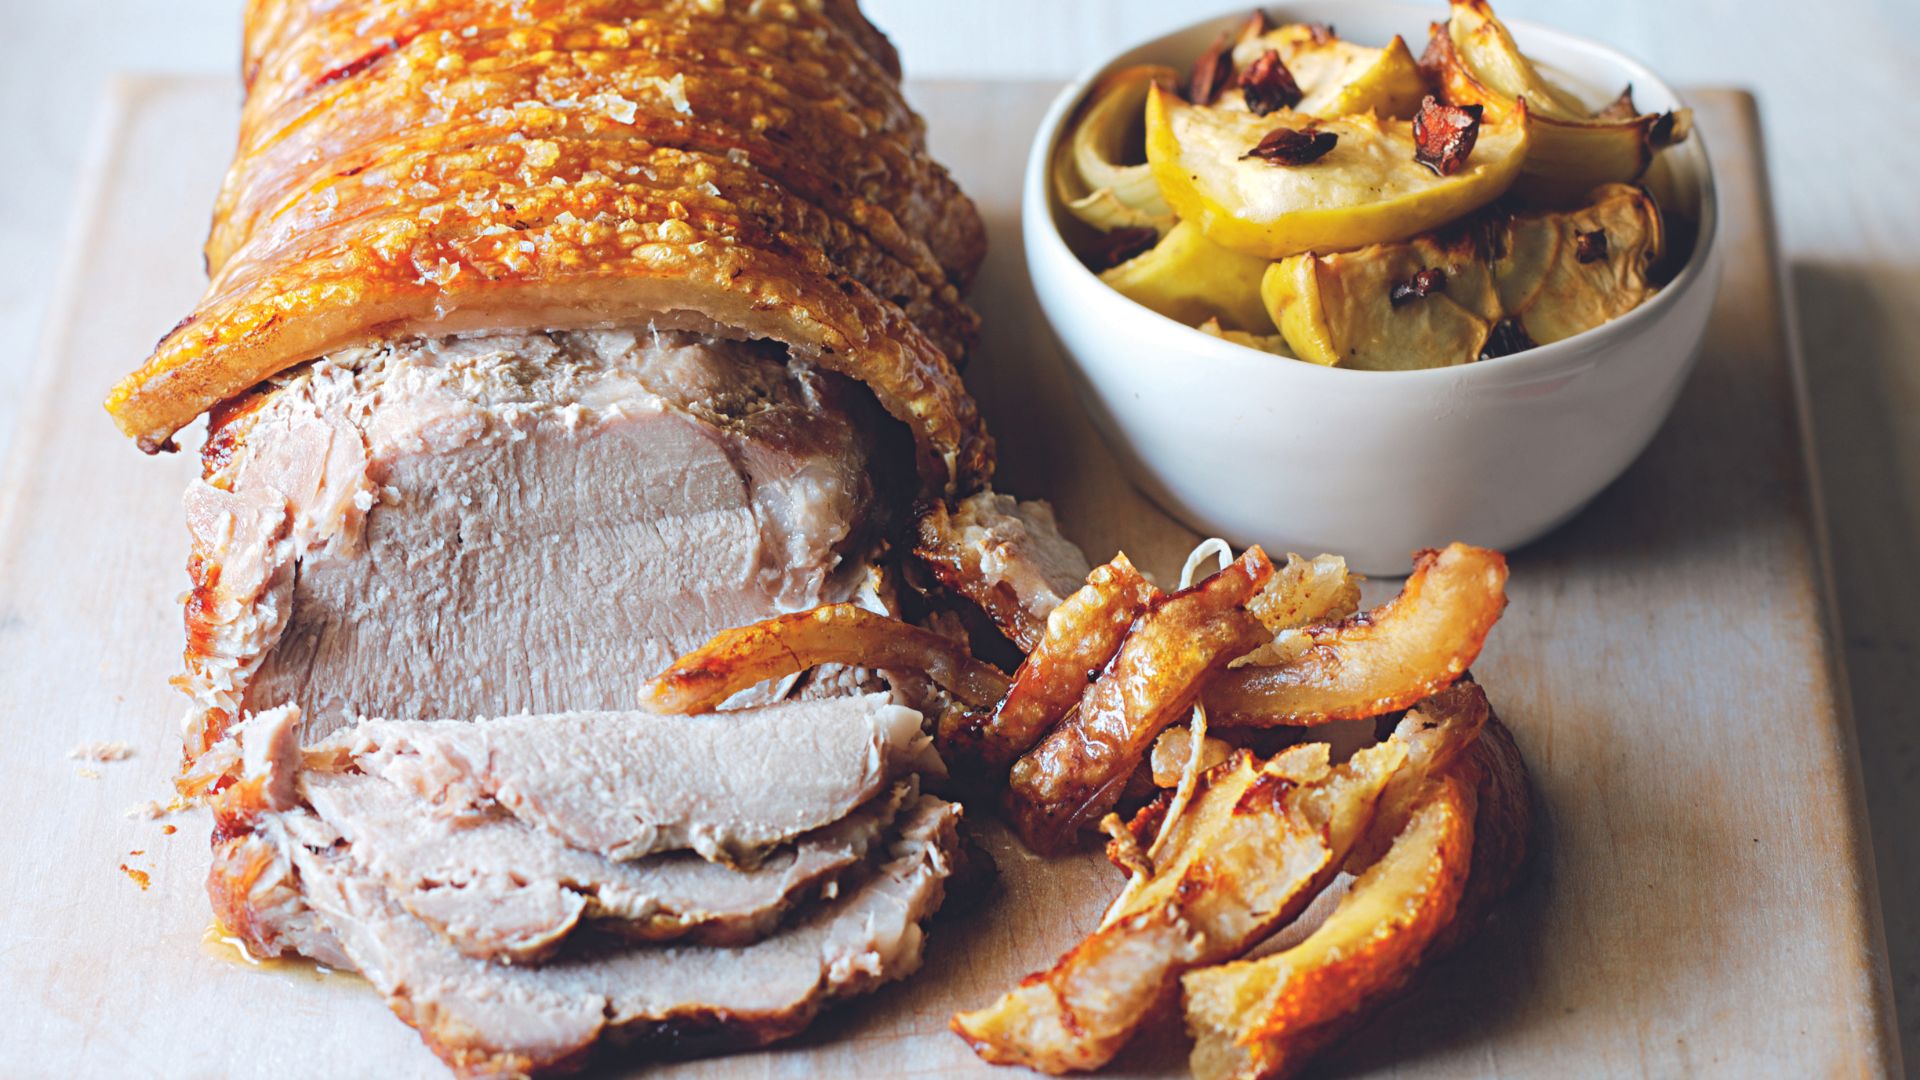 Roasted Pork Loin with Baked Apple and Onion Chutney - one of woman&home's Sunday lunch idea recipes